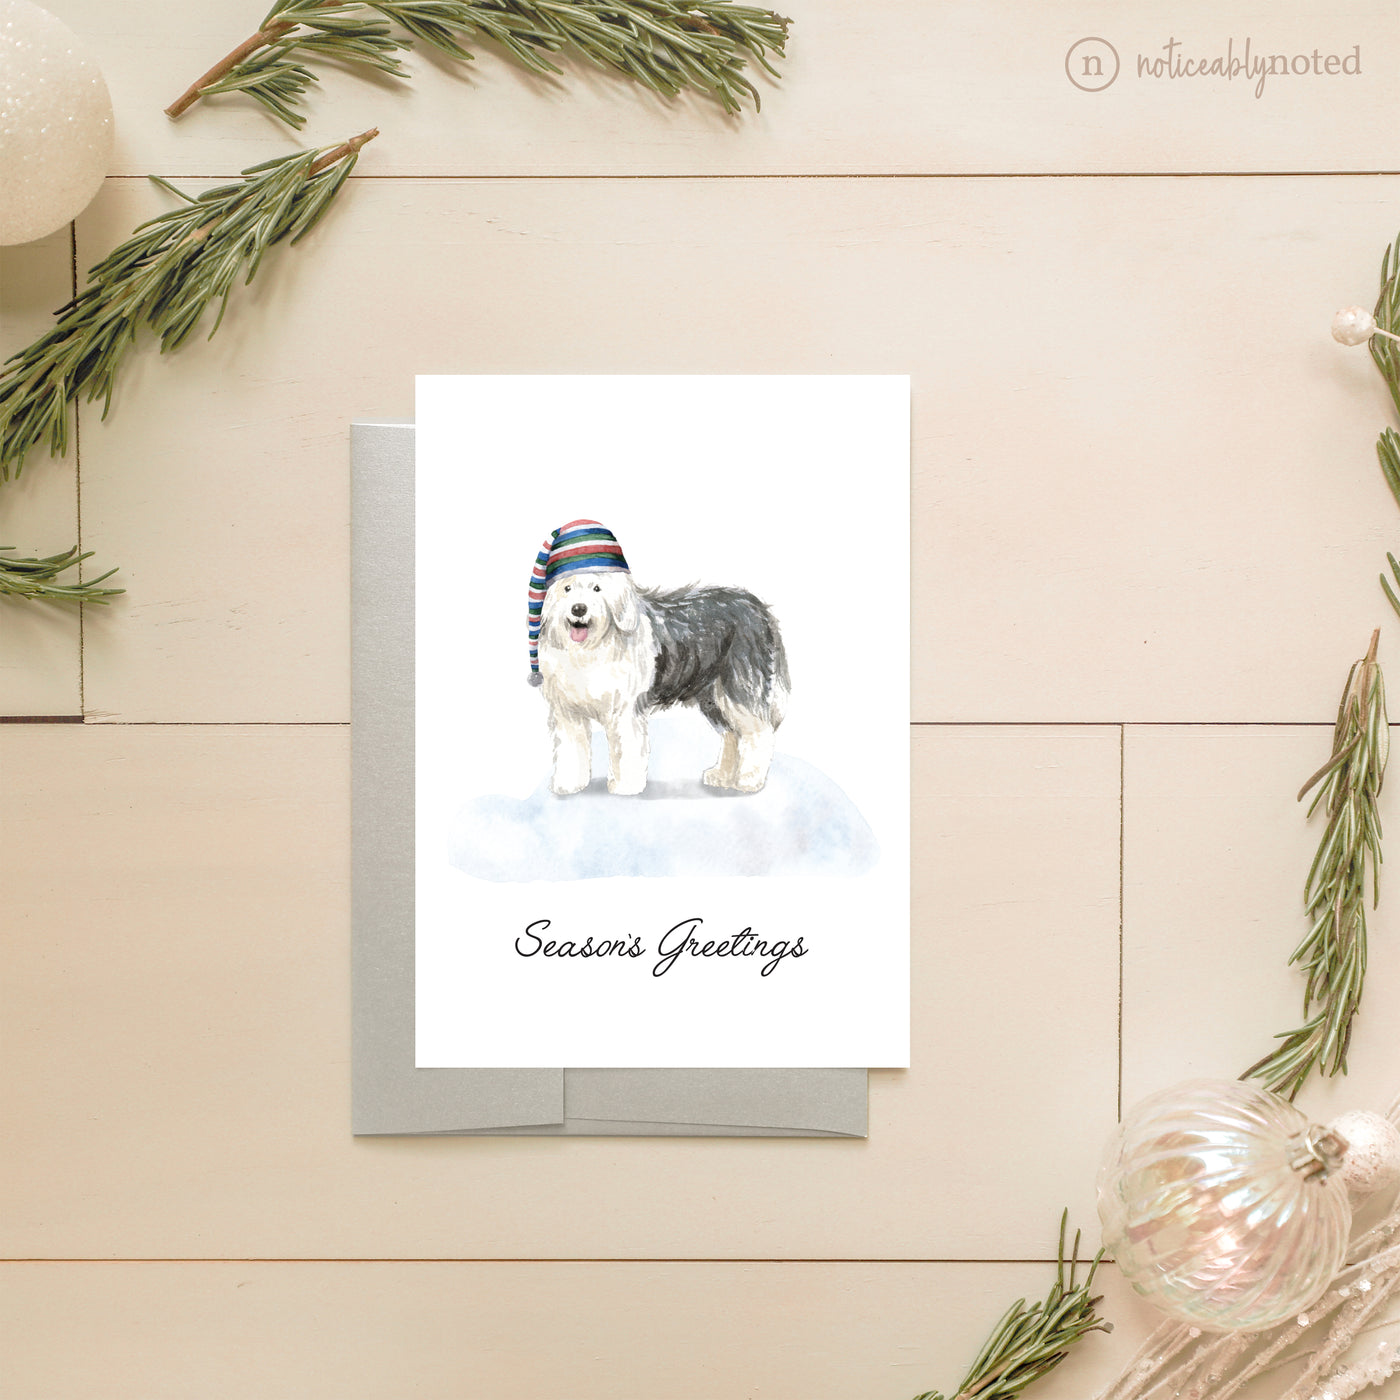 Old English Sheepdog Christmas Card | Noticeably Noted